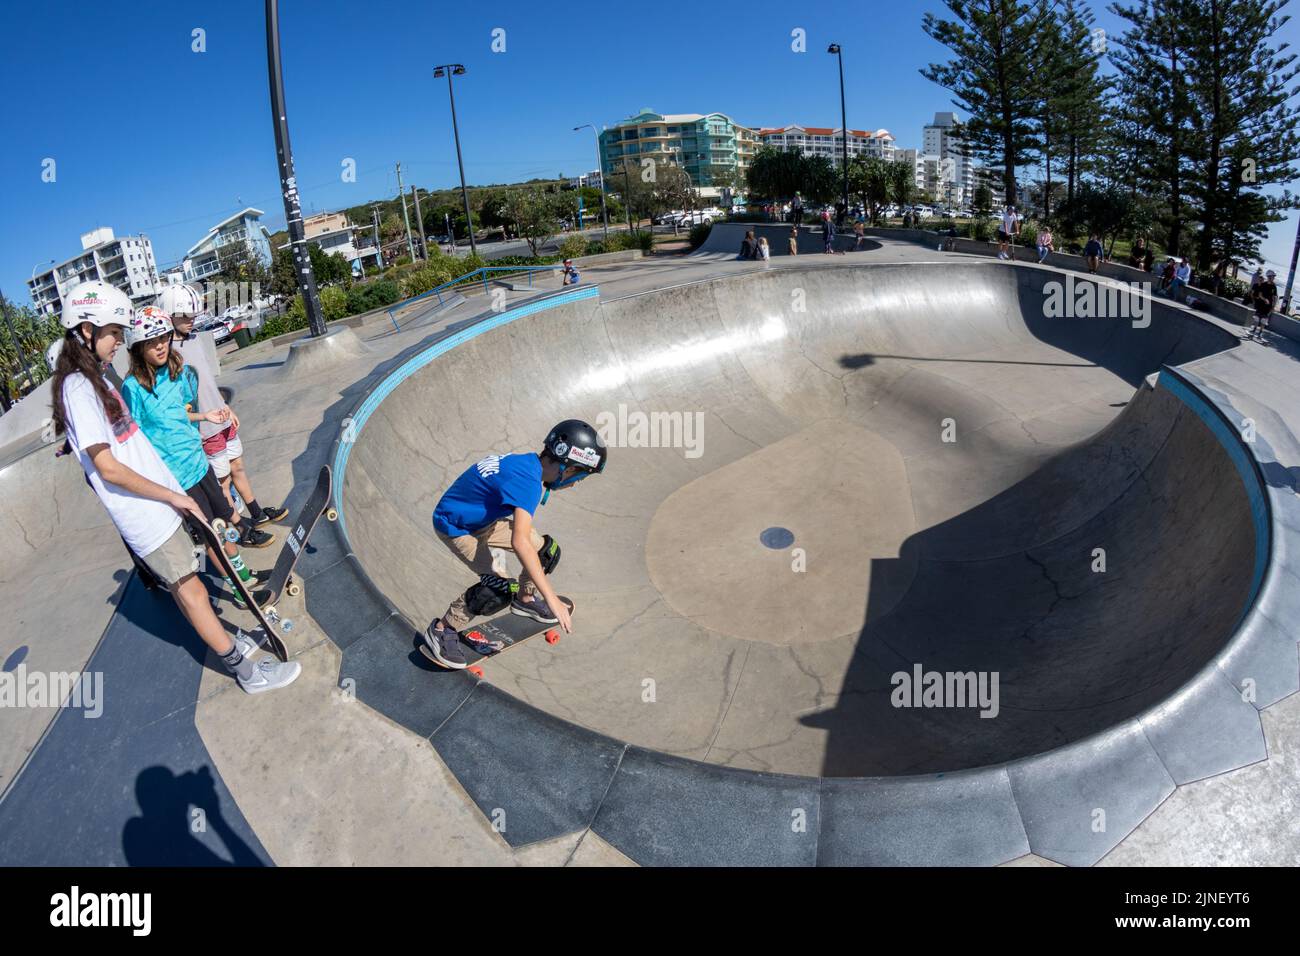 A young skater at Alexandra Headland skate park in Queensland, Australia Stock Photo